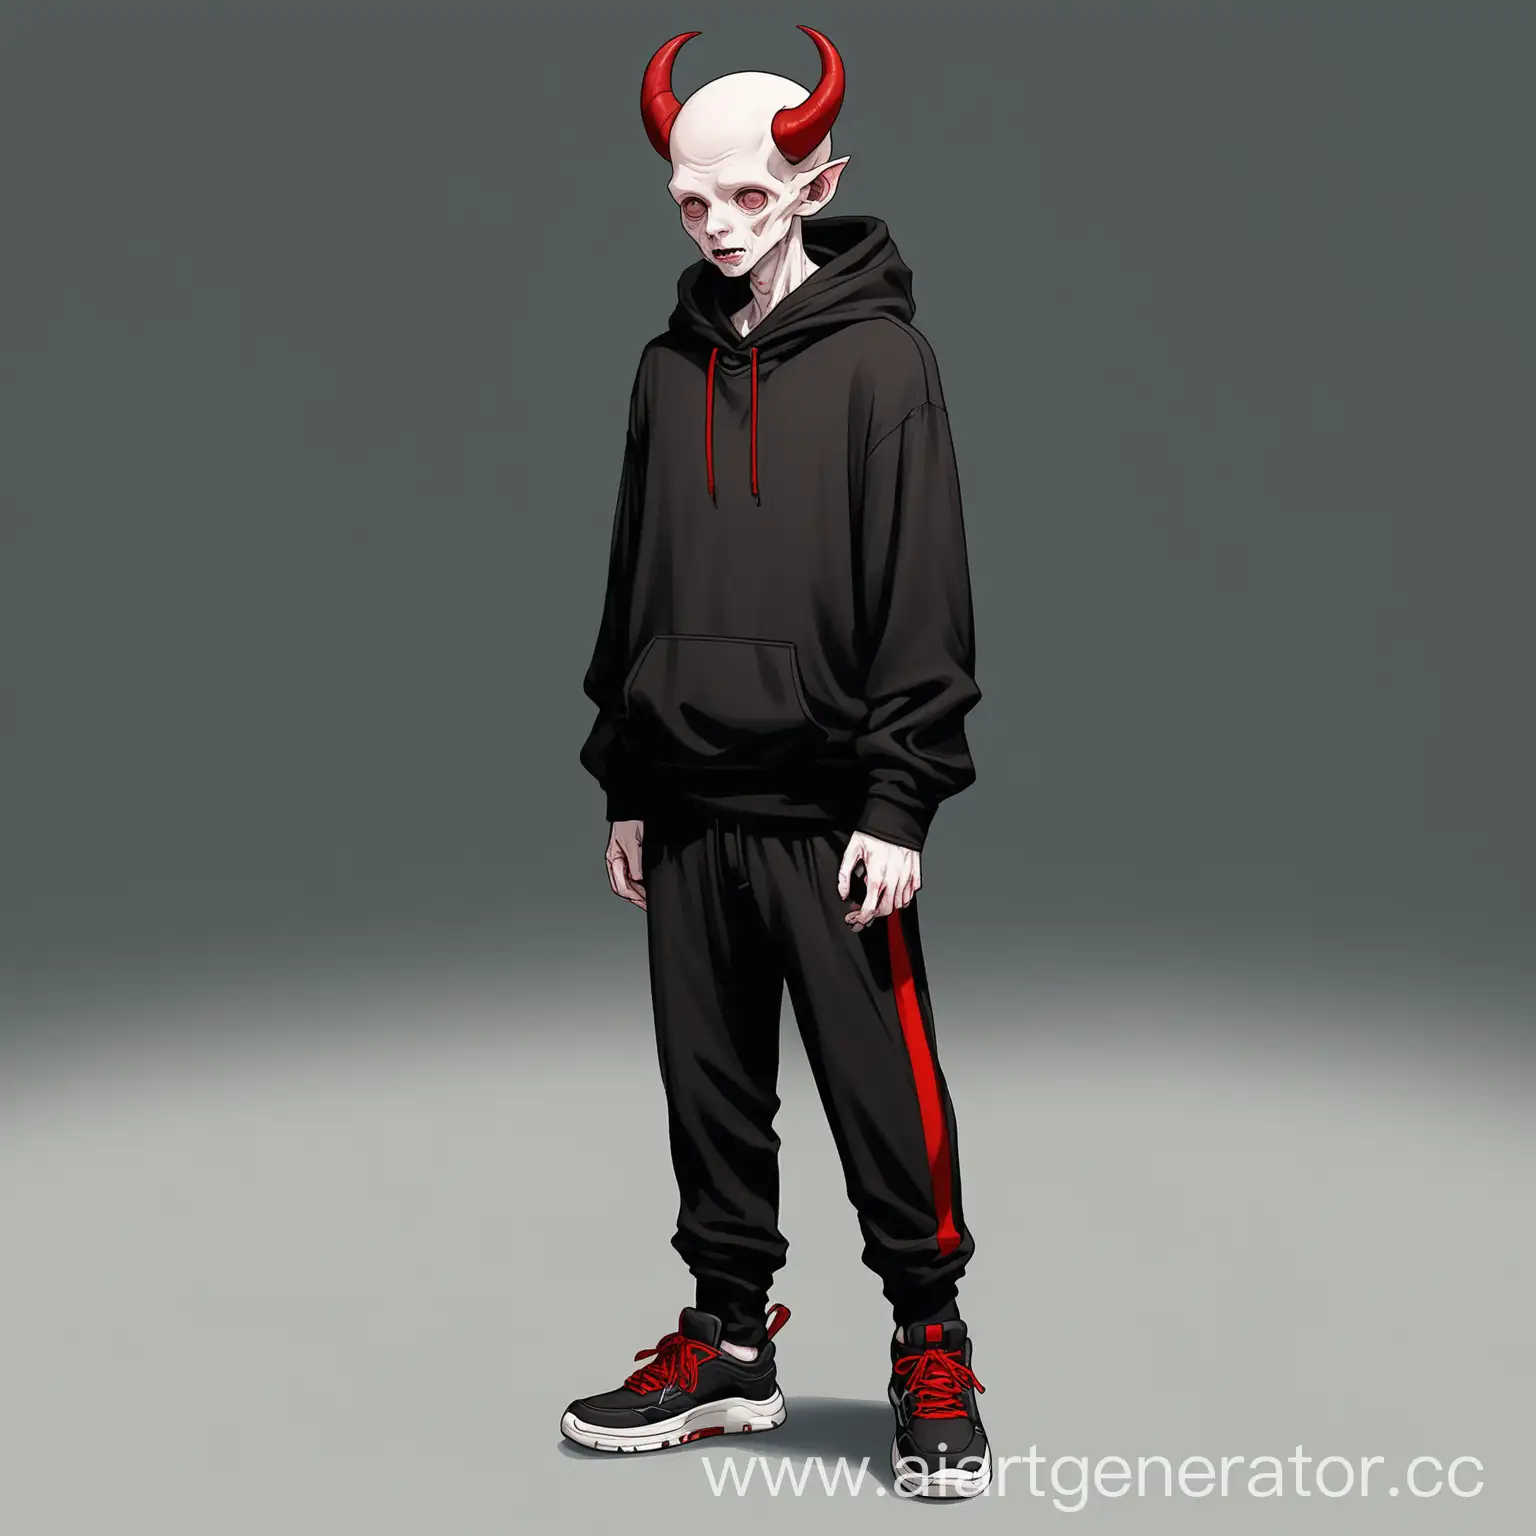 Pale-Man-with-Red-Horns-in-Black-Hoodie-and-Sneakers